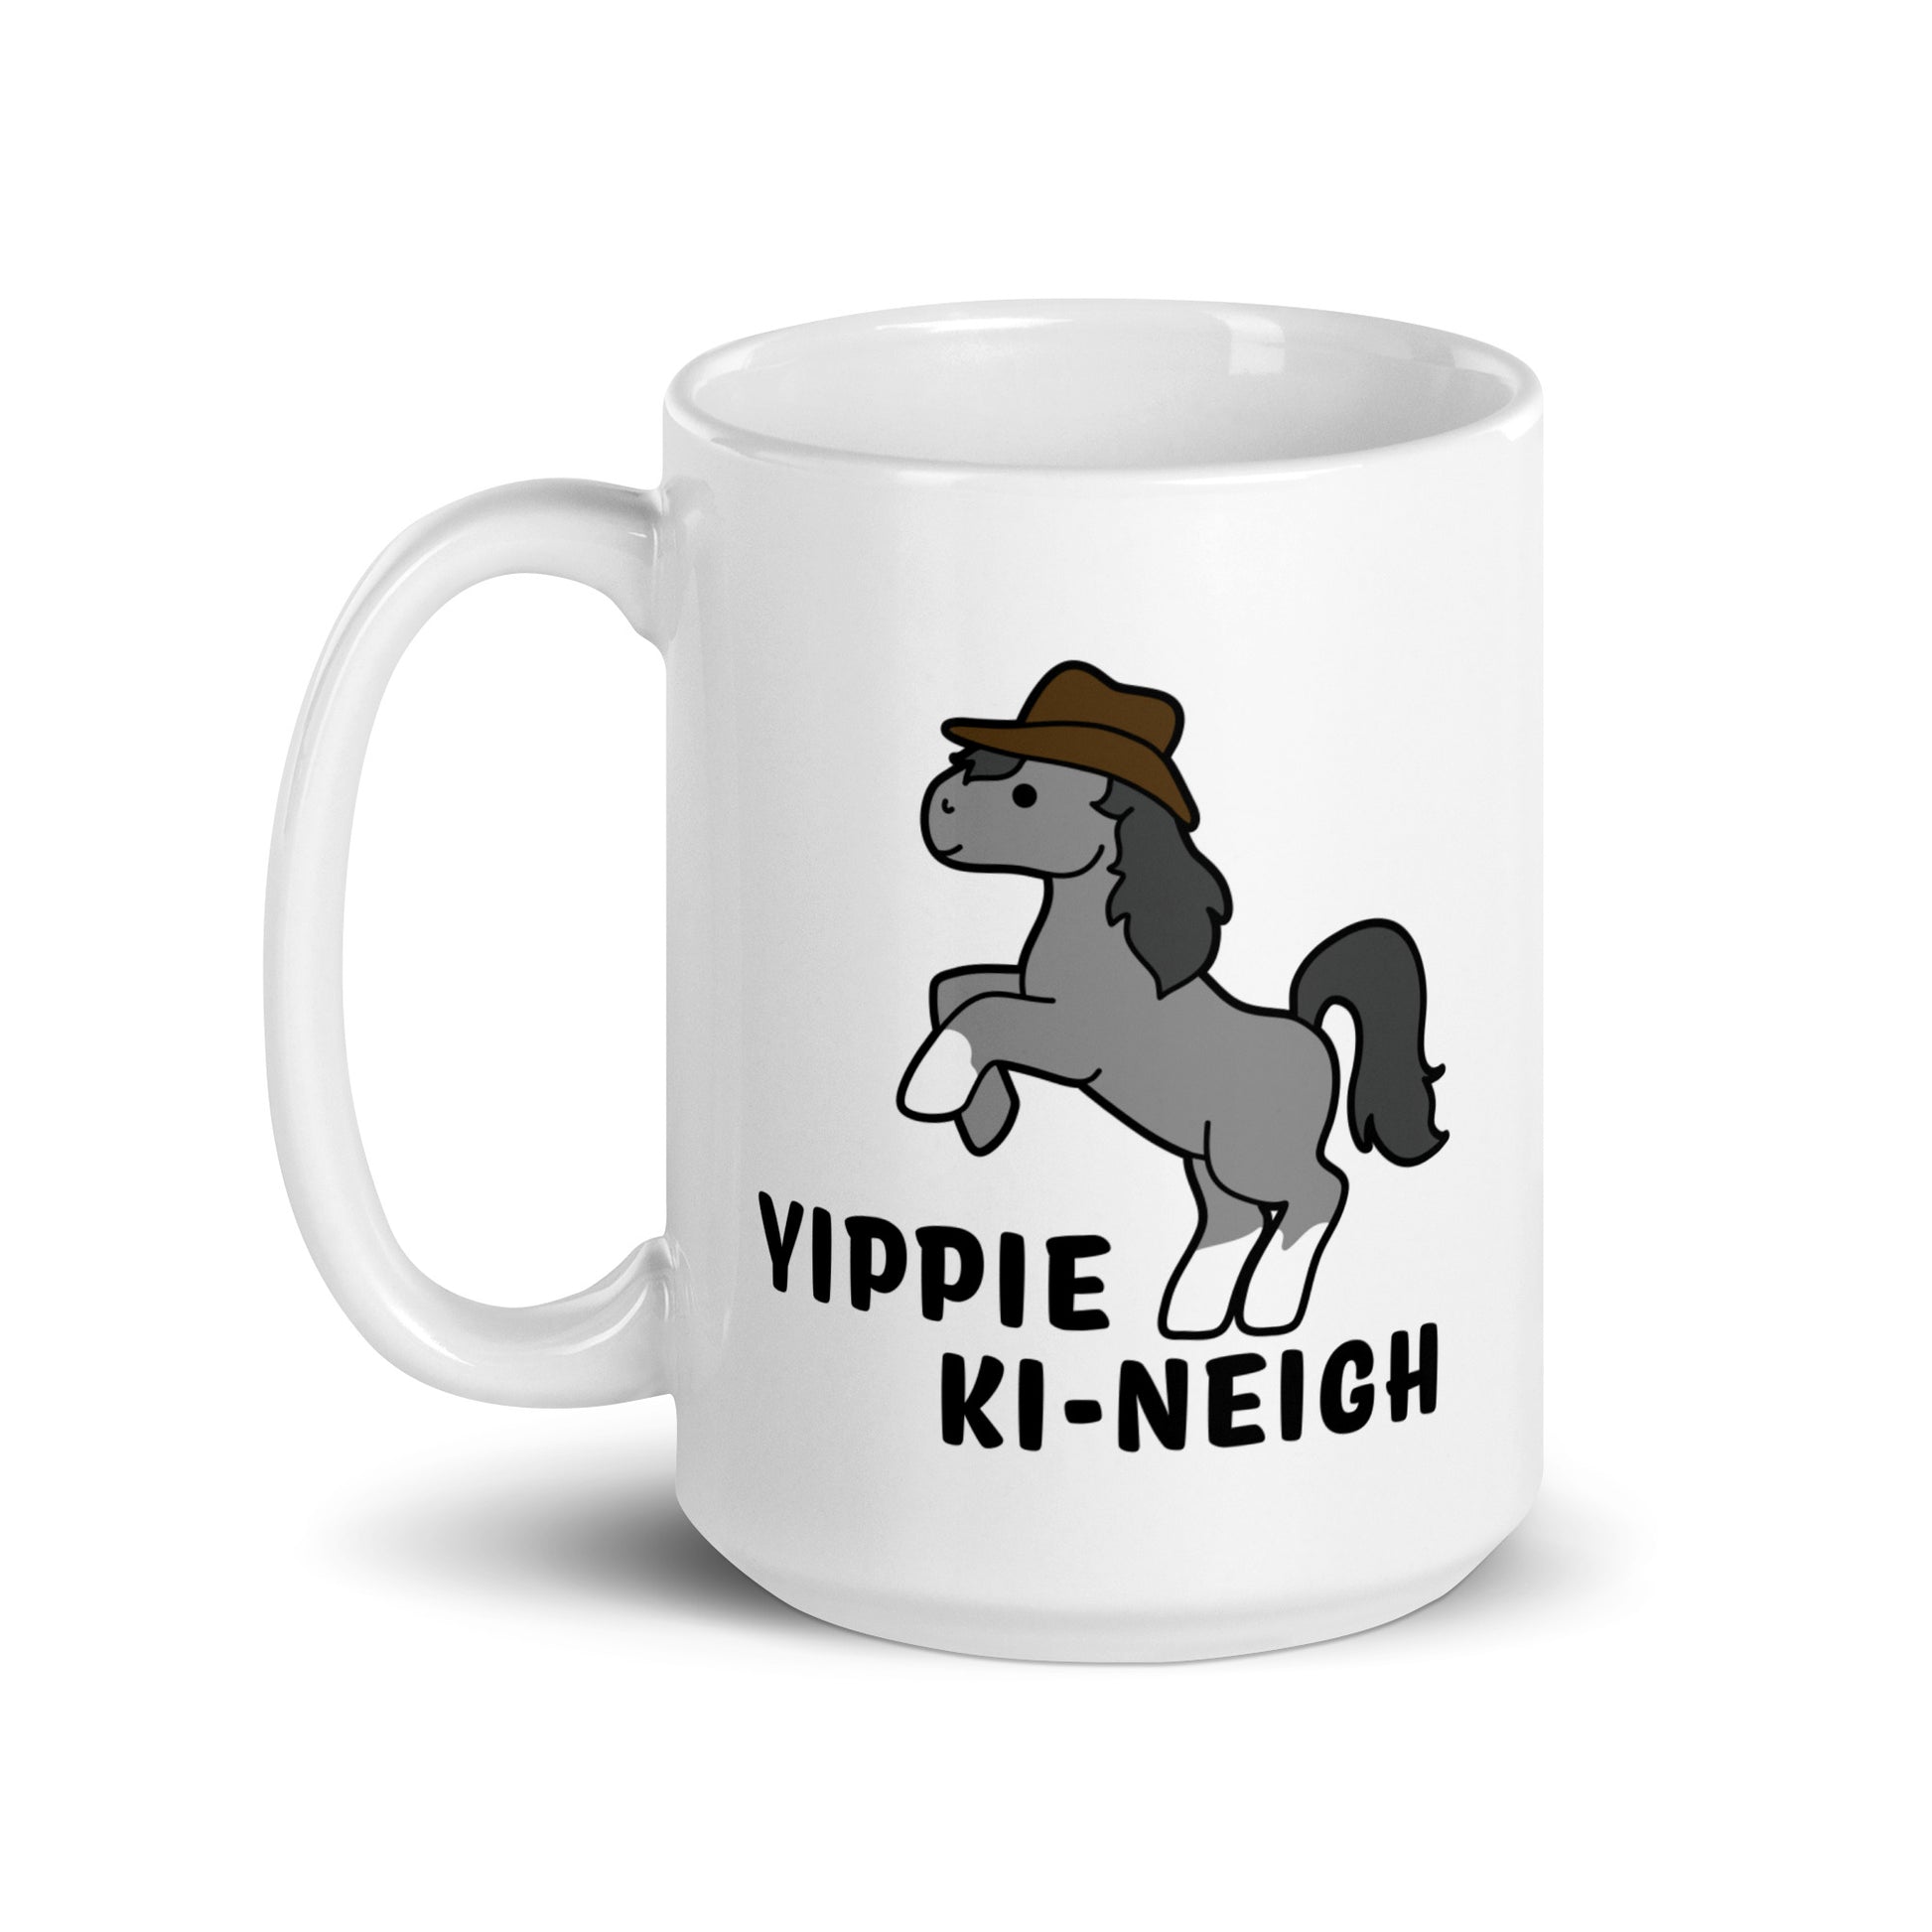 A white 15 ounce ceramic coffee mug featuring an illustration of a smiling grey pony rearing and wearing a cowboy hat. Text underneath the pony reads "Yippie Ki-Neigh"